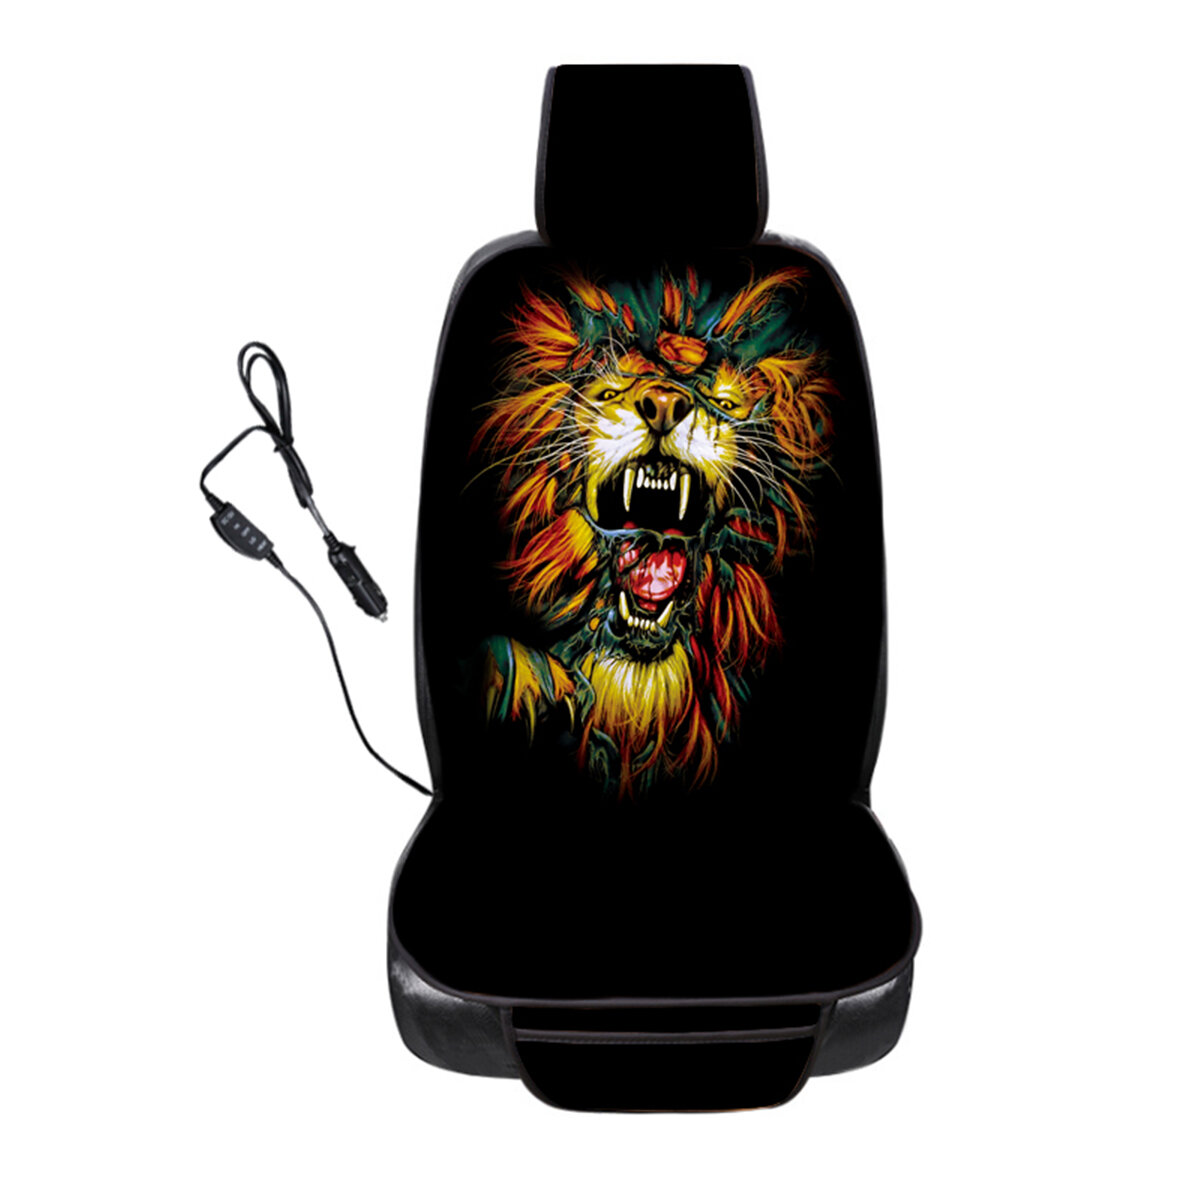 1PC Left/Right Heating 3D Lion Printing Seat Covers Full Seat Pad Protect Car Heated Cushion